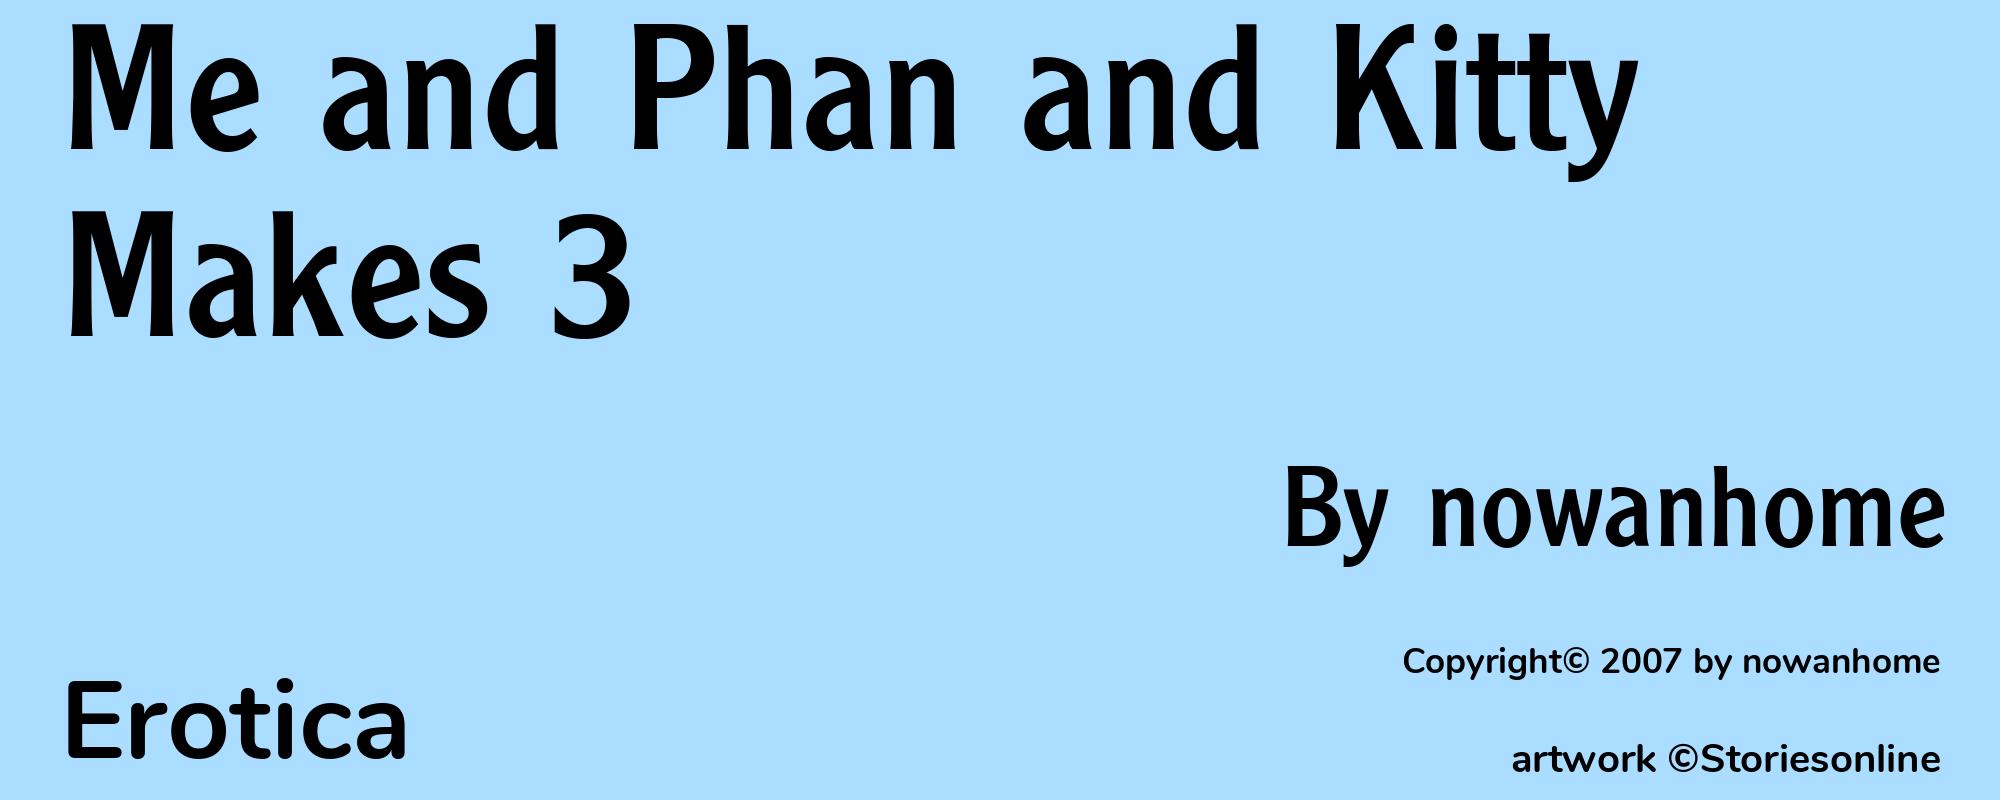 Me and Phan and Kitty Makes 3 - Cover